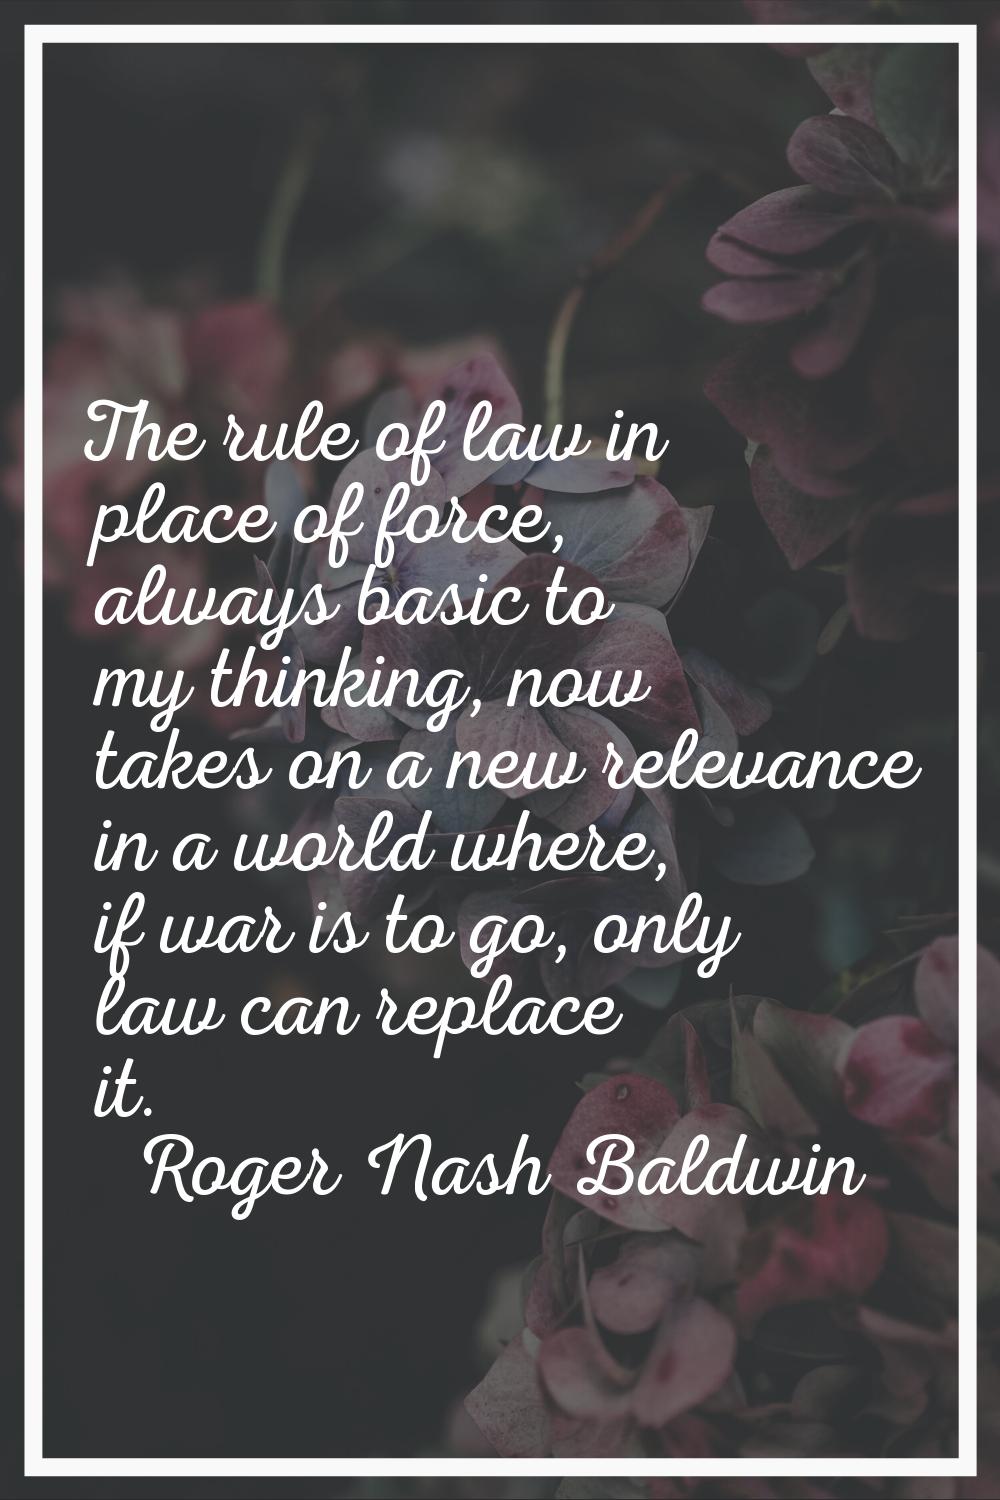 The rule of law in place of force, always basic to my thinking, now takes on a new relevance in a w